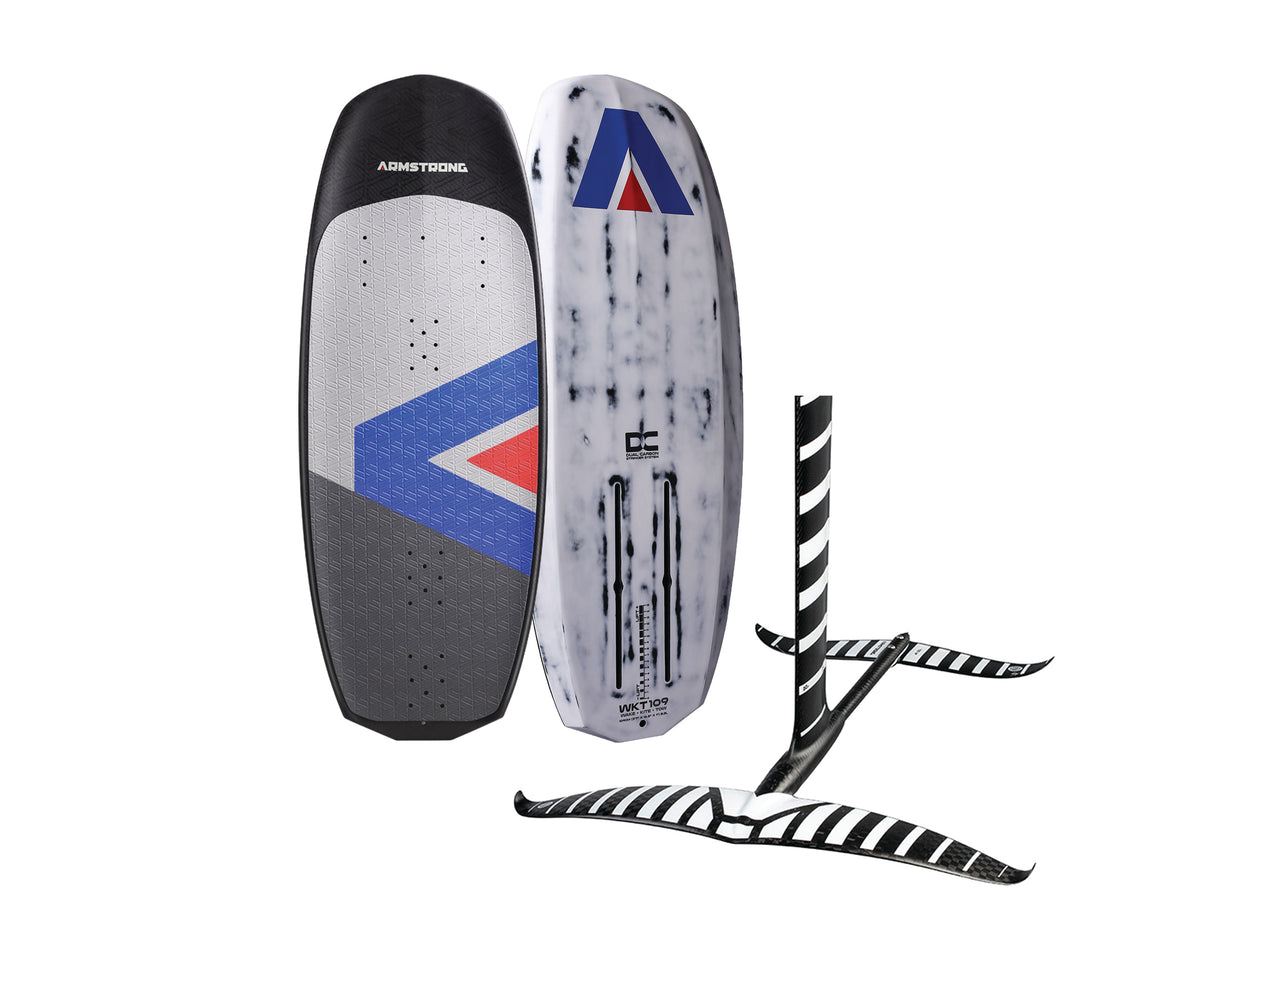 Armstrong Wakefoil Board W/ Armstrong HS625 Foil Kit Package